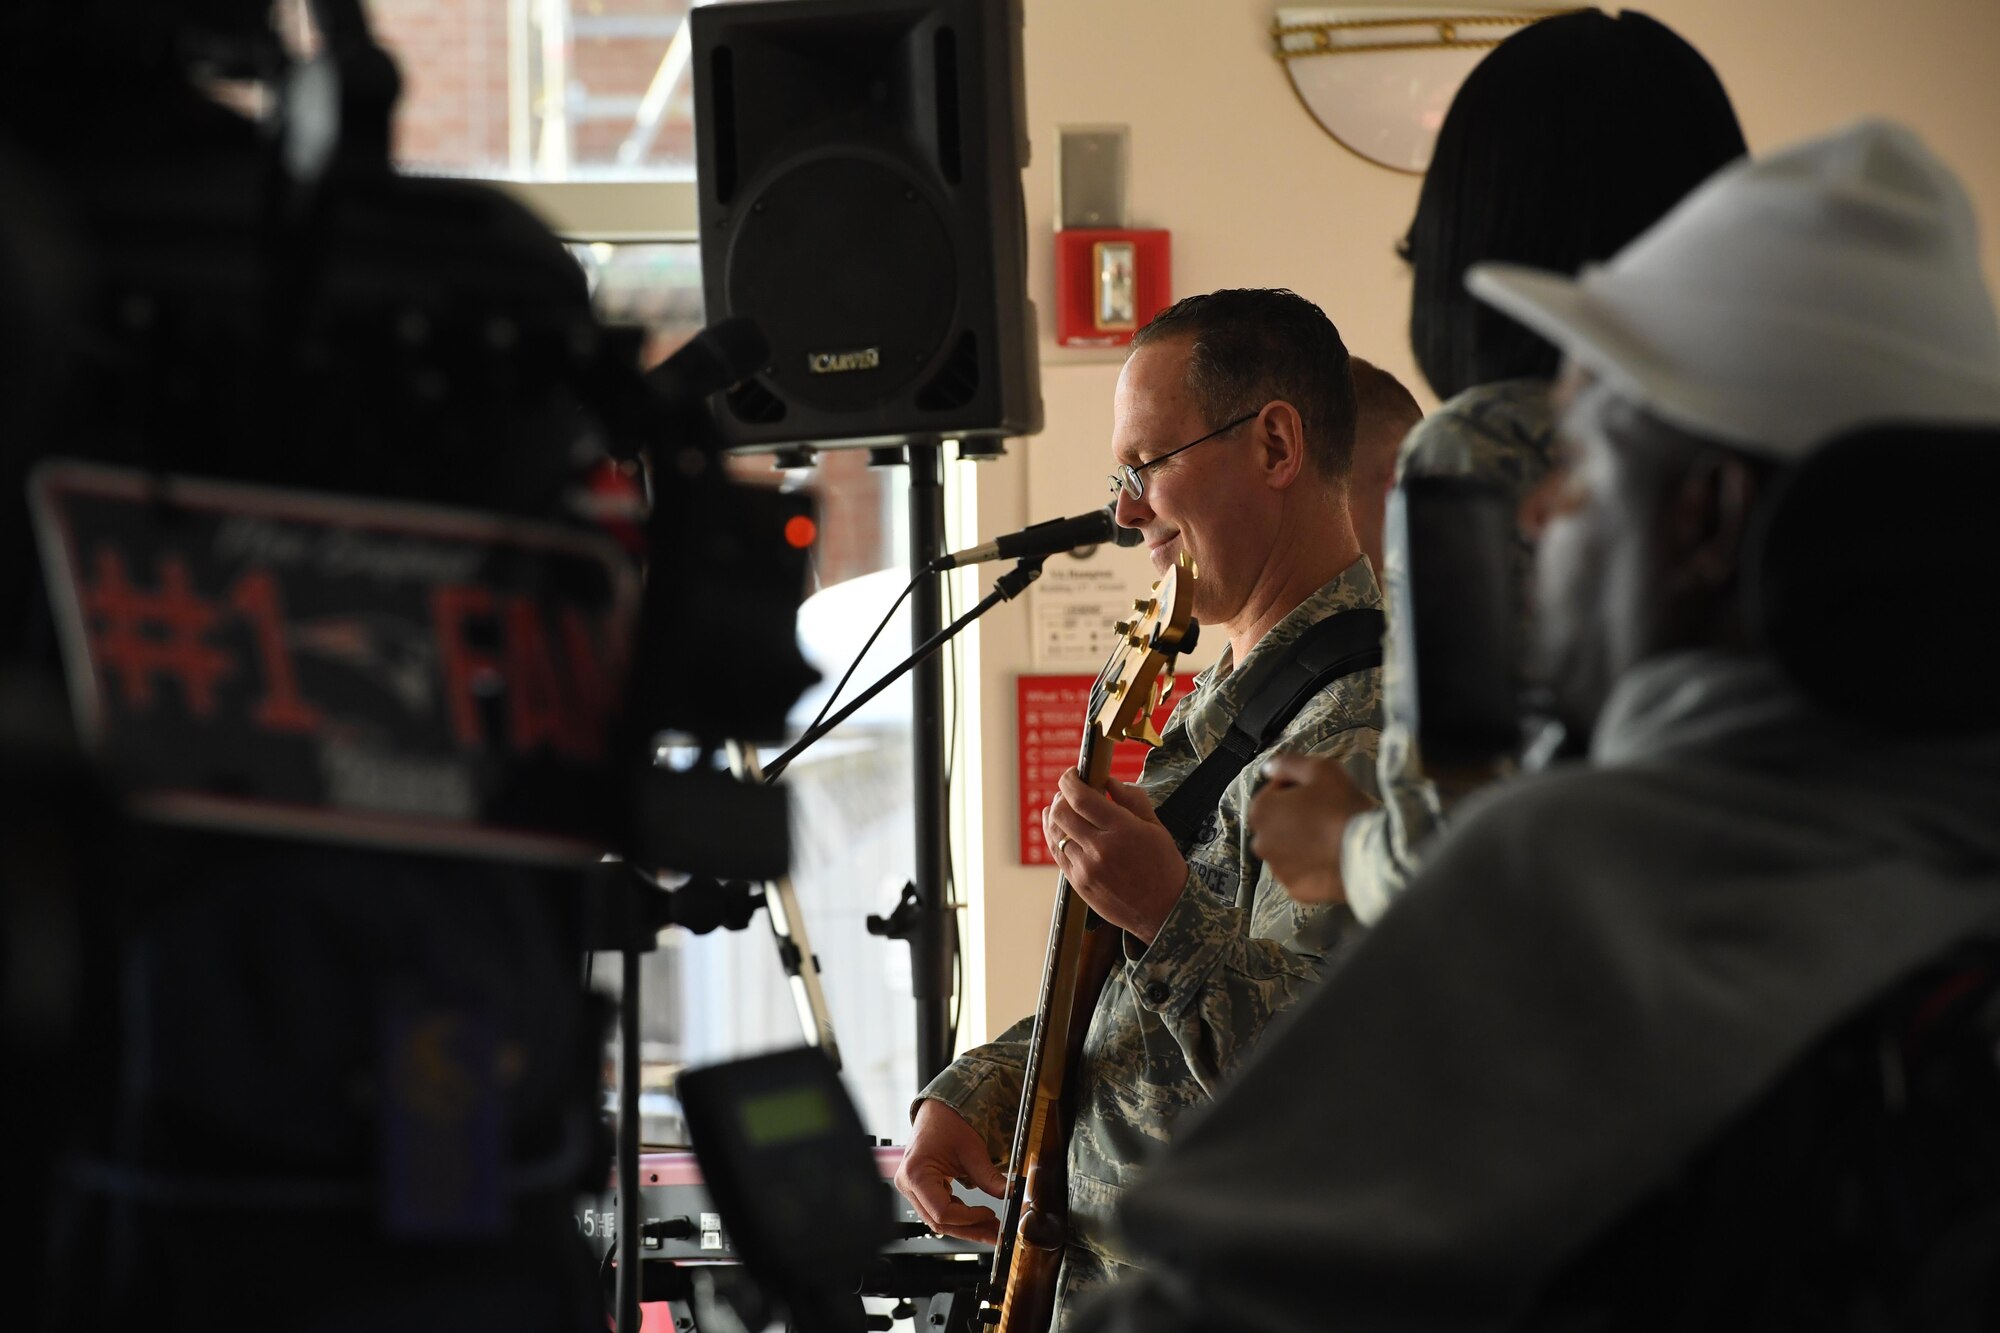 Master Sgt. Kenny Maurais, a bassist with the U.S. Air Force Heritage of America Band, entertains the crowd during a holiday concert at the Hampton Veteran’s Medical Center, Jan. 7, 2016. The Blue Aces have deployed multiple times to Southwest Asia, supporting U.S. and coalition troops, while building international friendships. (U.S. Air Force photo by Staff Sgt. Nick Wilson)